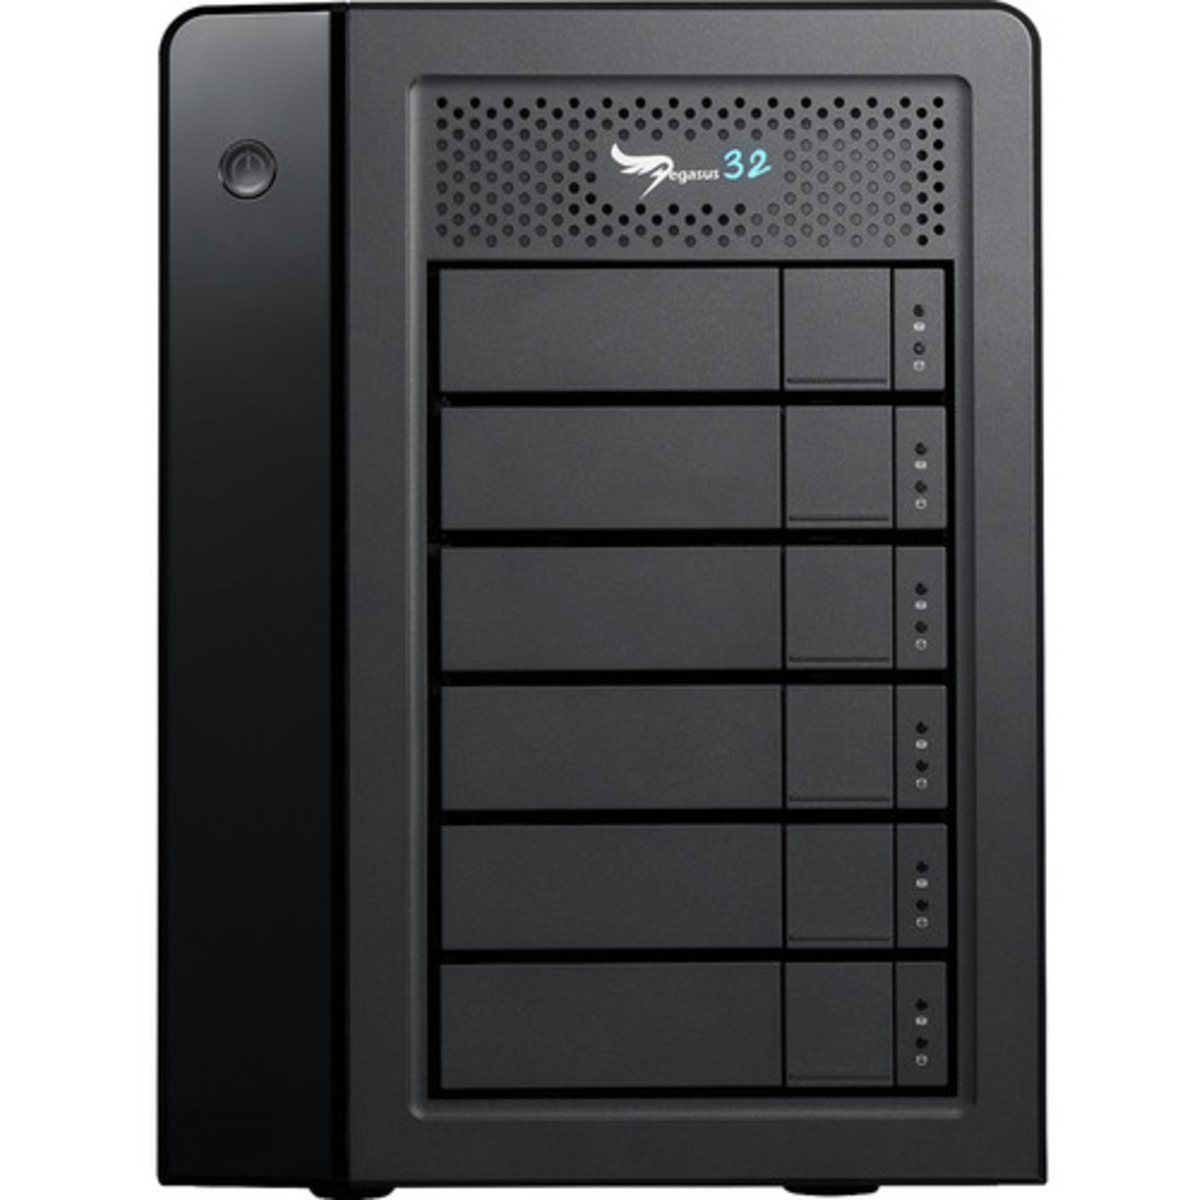 buy $7822 Promise Technology Pegasus32 R6 Thunderbolt 3 48tb Desktop DAS - Direct Attached Storage Device 6x8000gb Samsung 870 QVO MZ-77Q8T0 2.5 SATA 6Gb/s SSD CONSUMER Class Drives Installed - Burn-In Tested - nas headquarters buy network attached storage server device das new raid-5 free shipping usa christmas new year holiday sale Pegasus32 R6 Thunderbolt 3